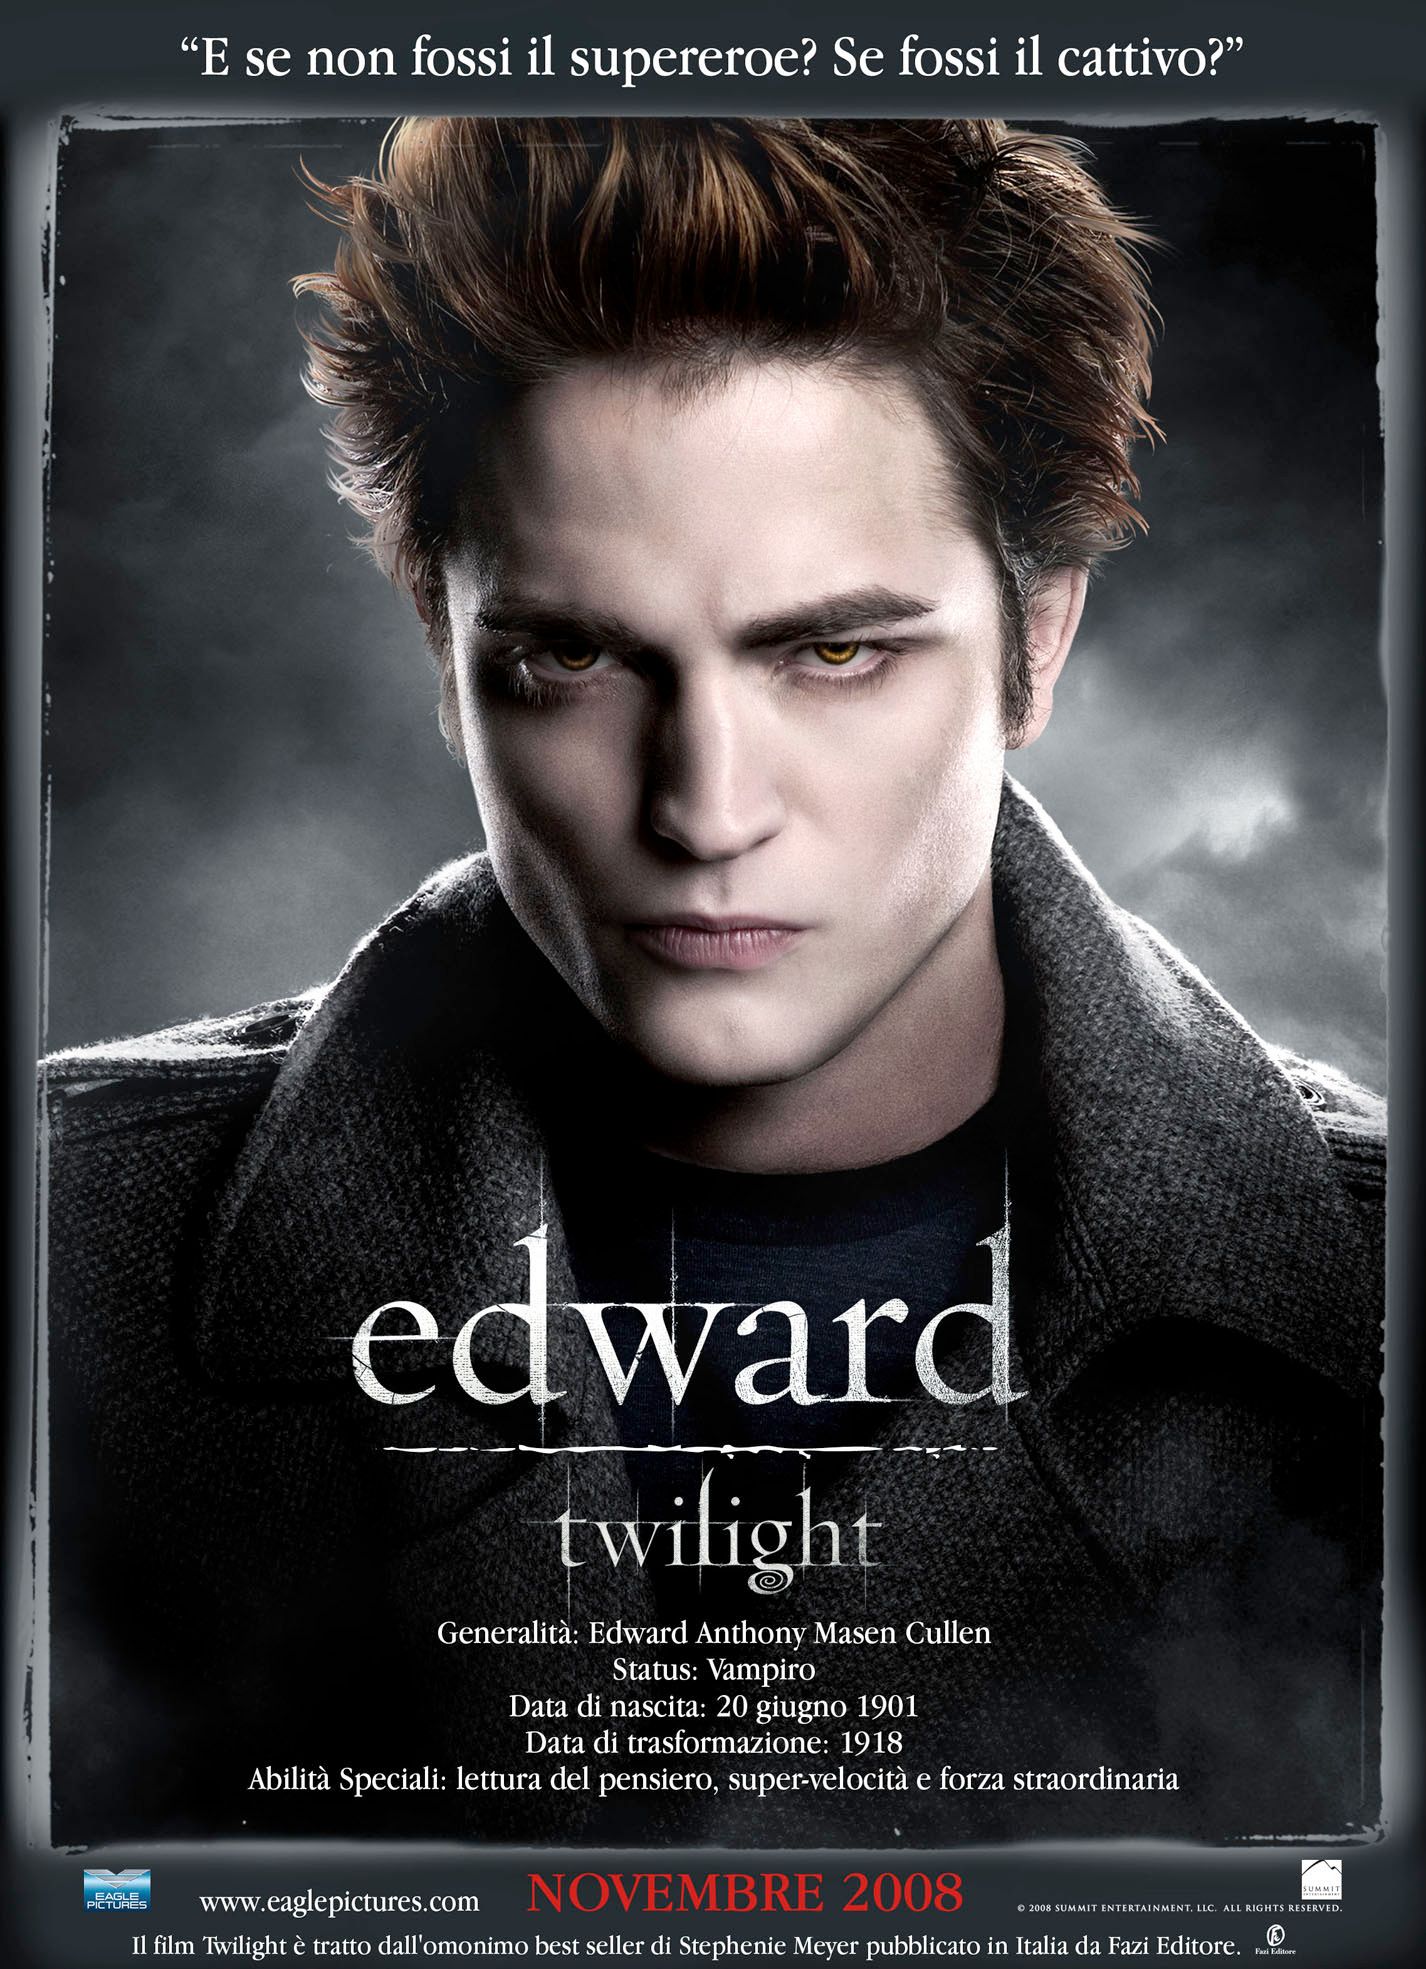 Twilight Character Poster